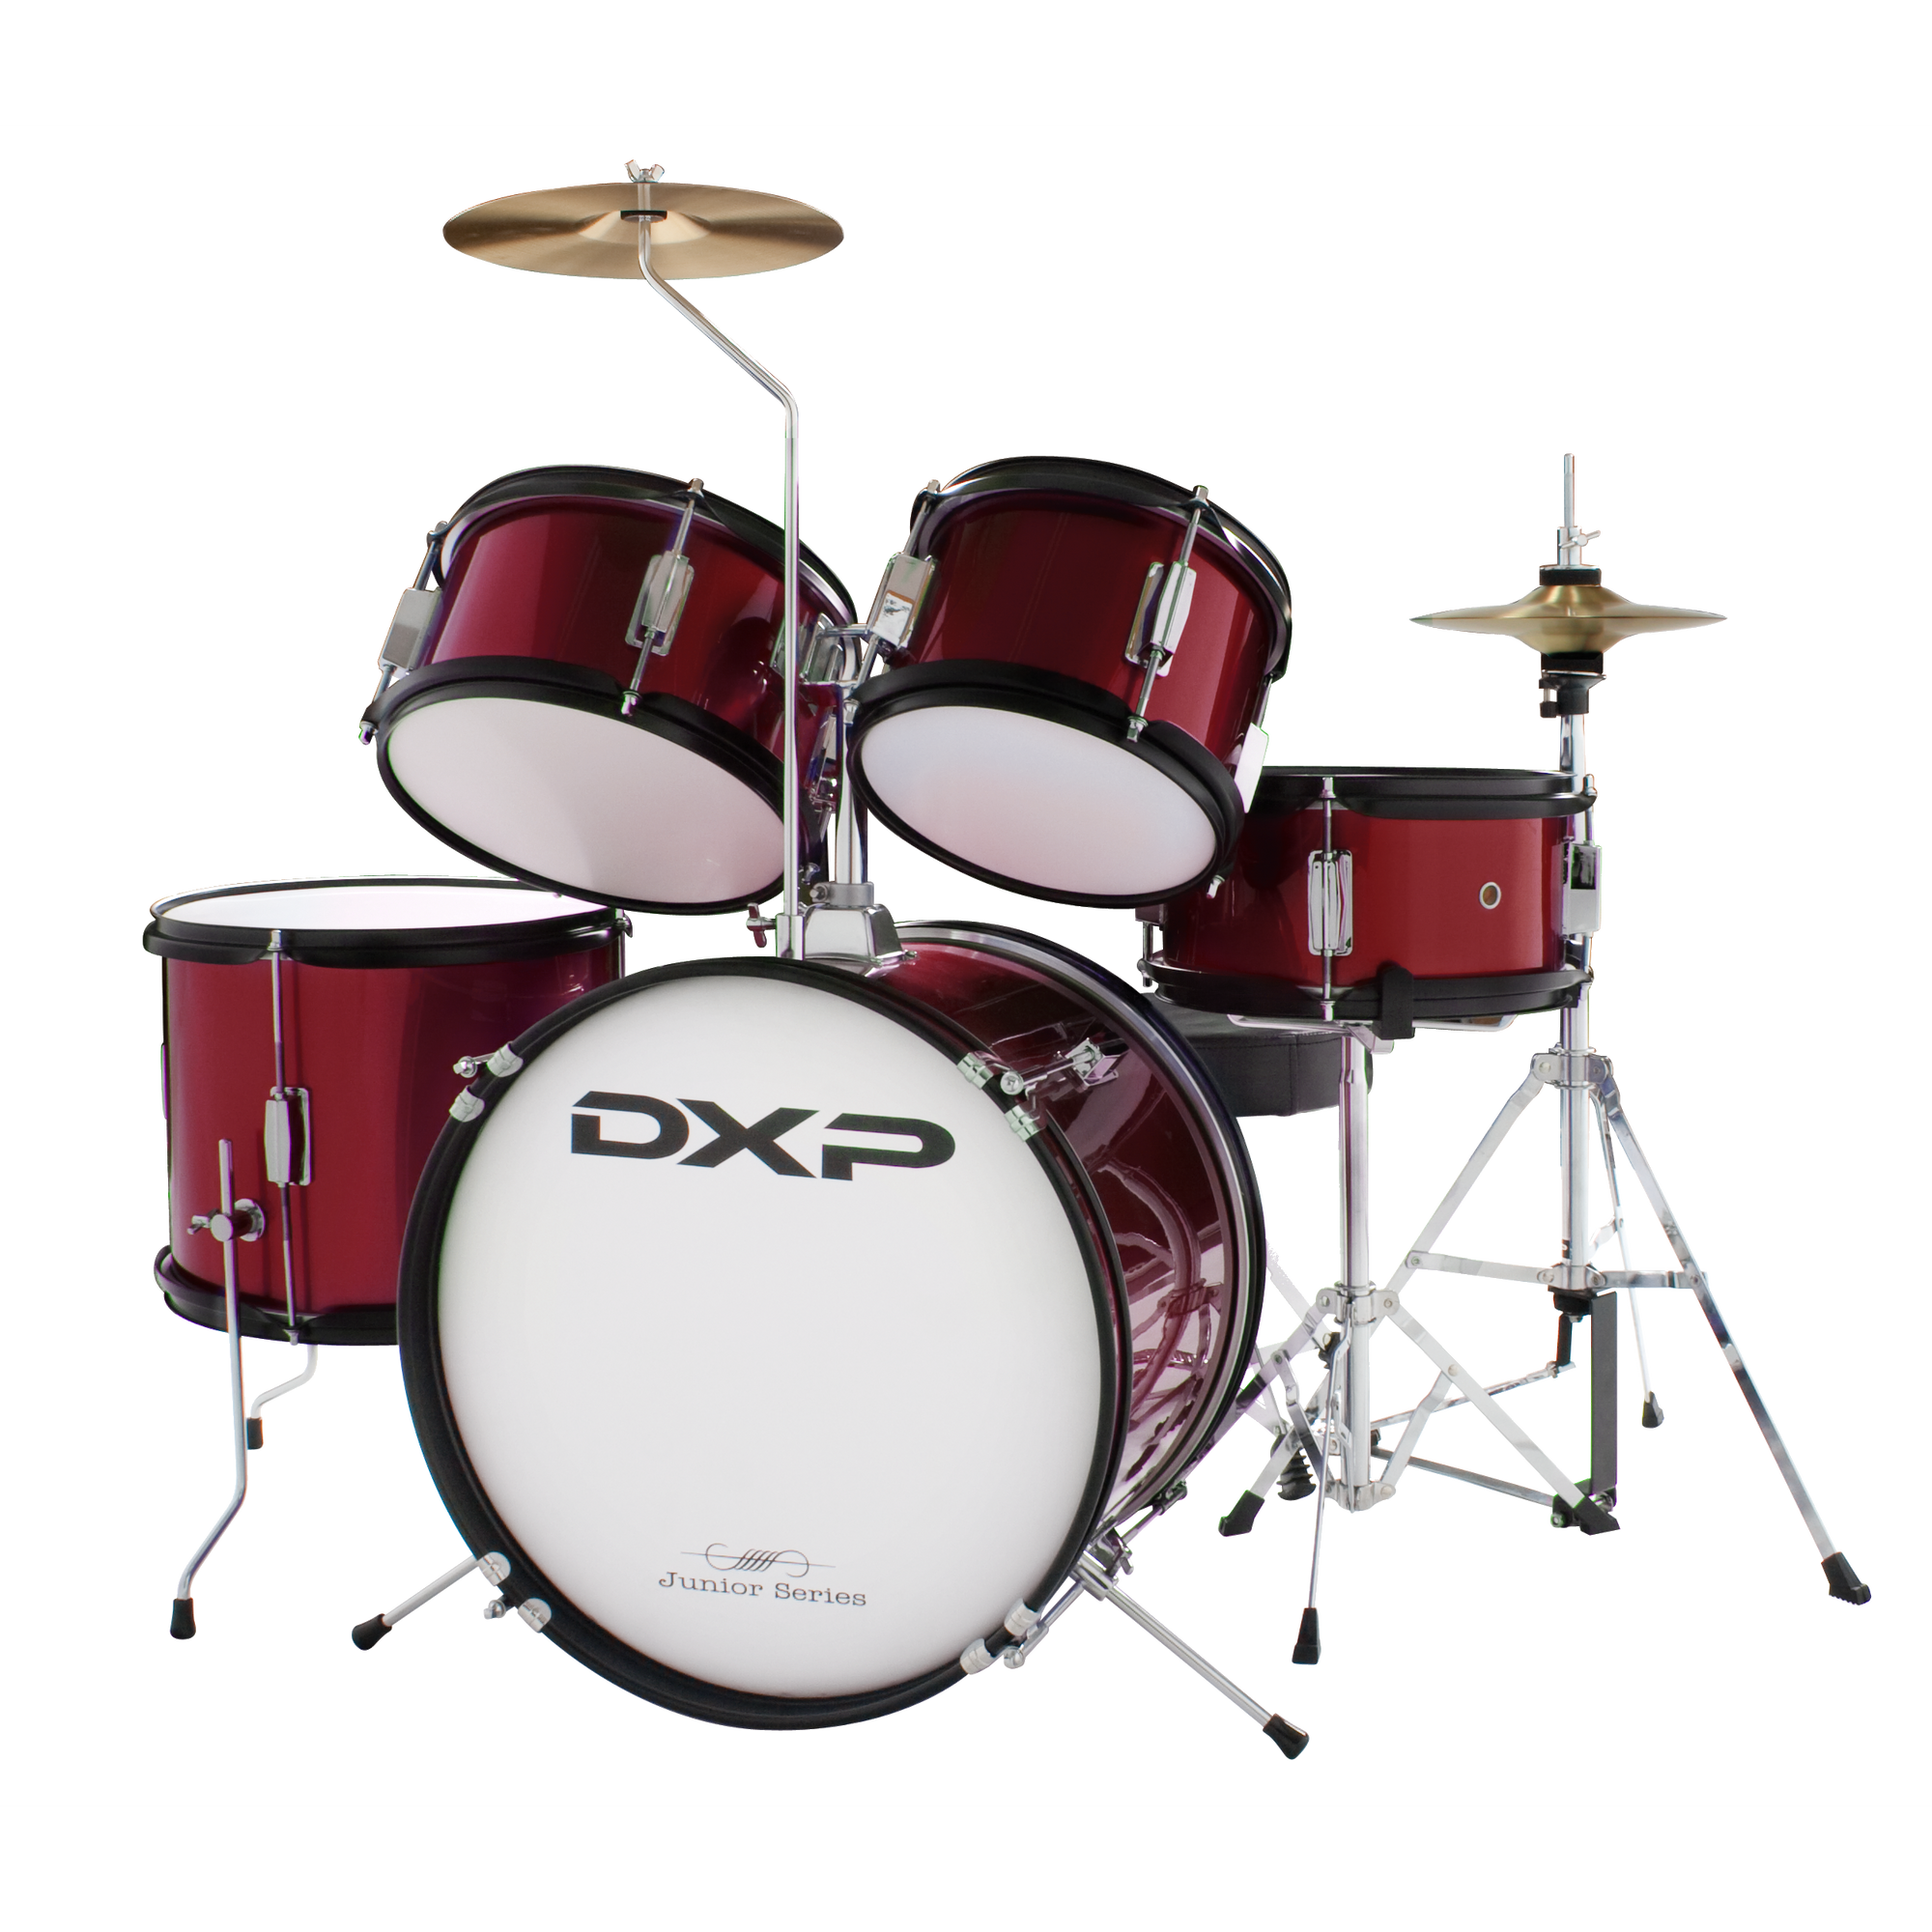 The DXP 5 piece Junior Drum Kit  is a great and highly affordable option for the younger starting drummer. DXP 5 piece Junior Drum Kit is an exciting and smaller sized kit for the emerging young drummer. The Junior drum kit comes at a great price too.